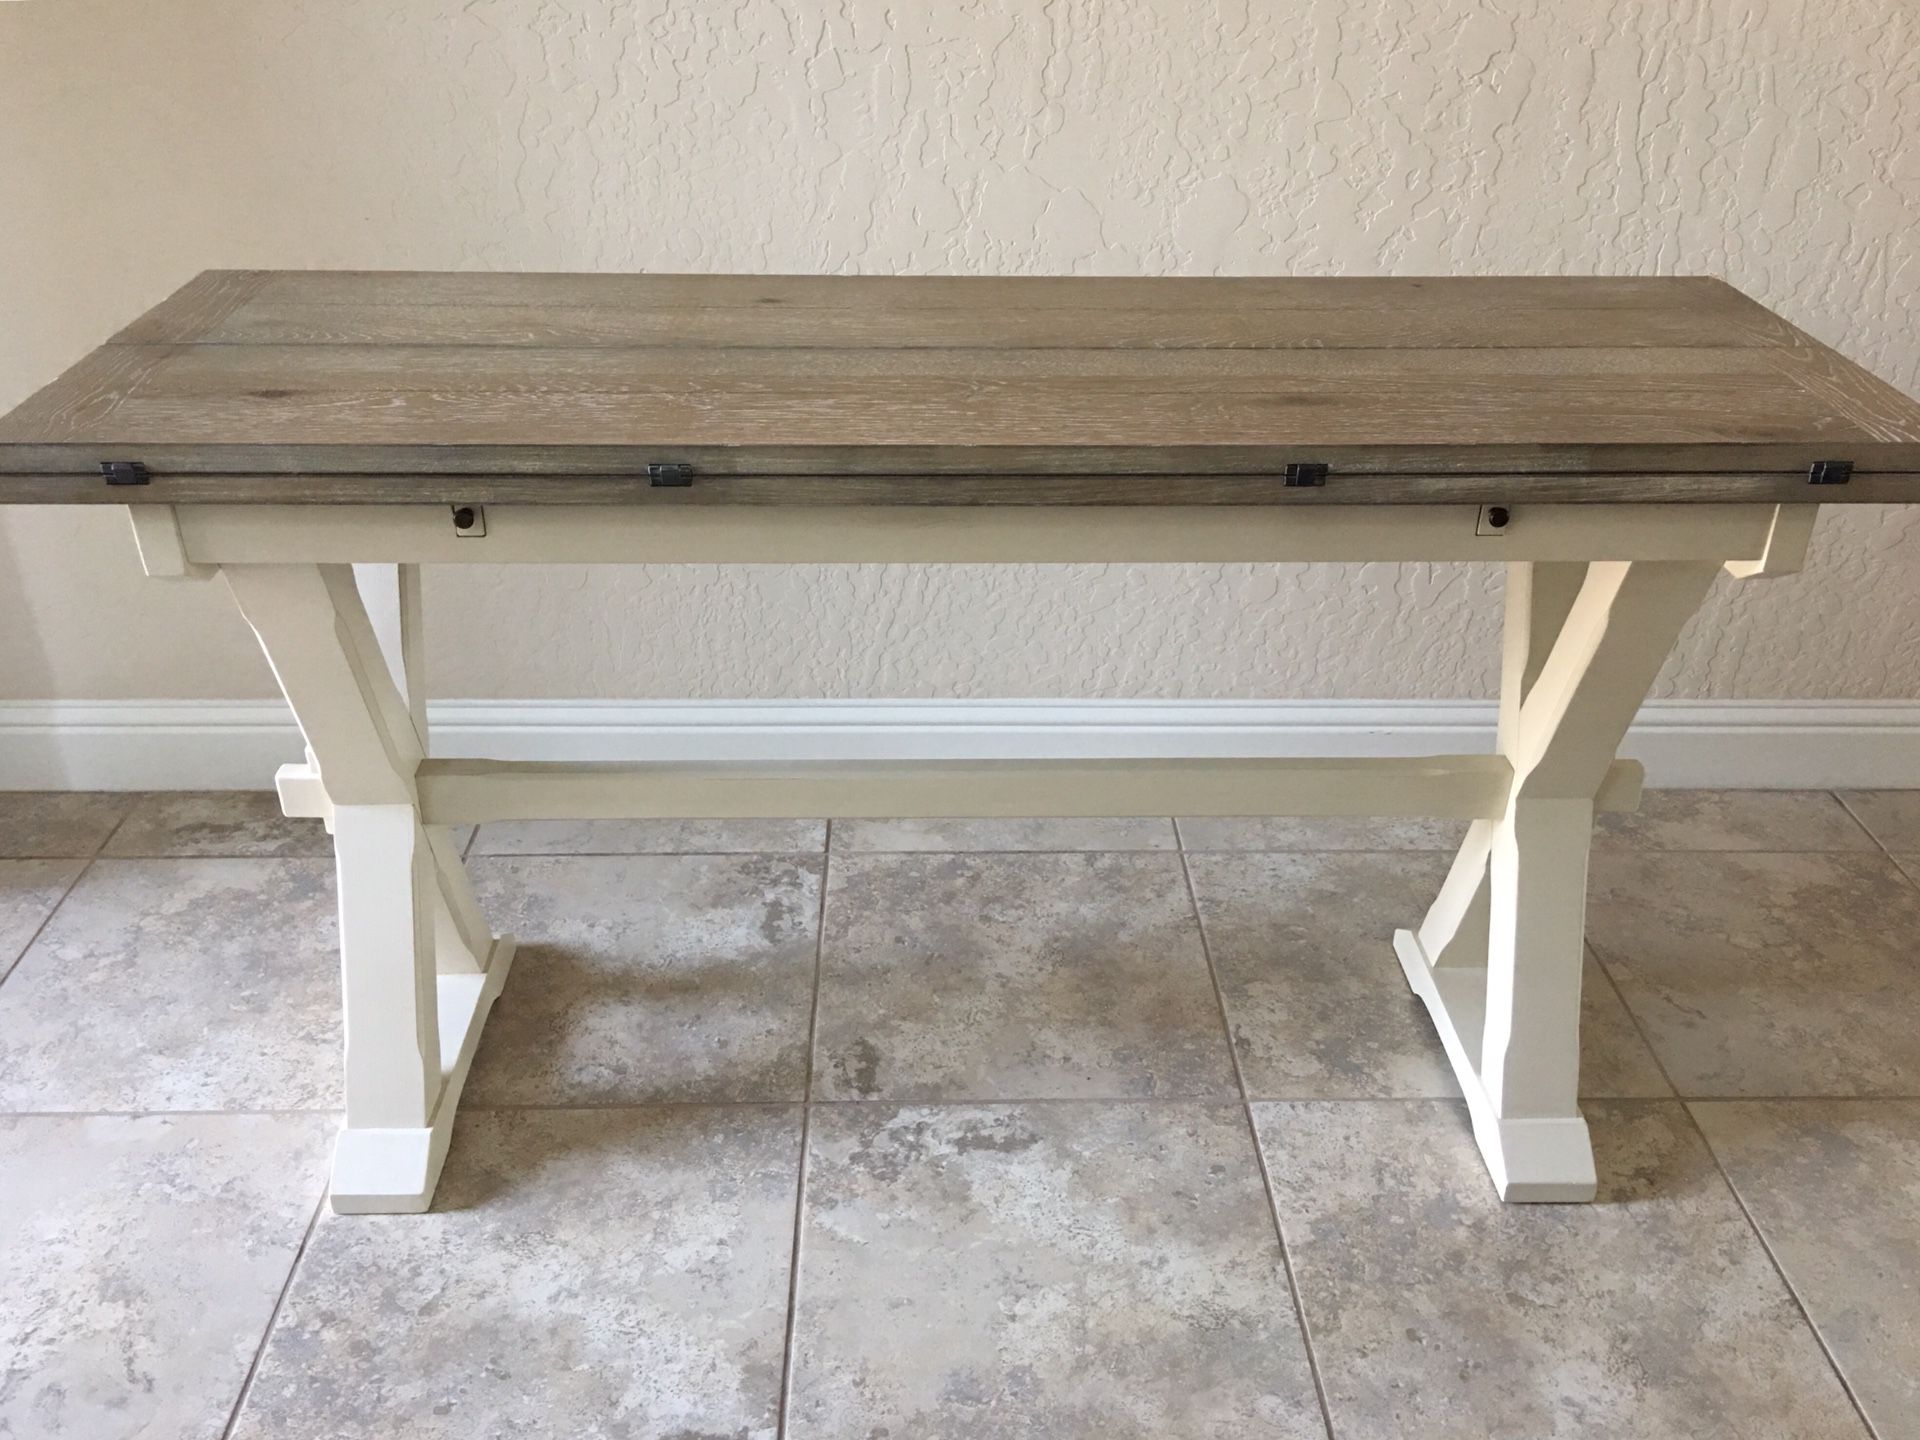 Drop Leaf Console Table, Writing Desk, & Dining Table in one!